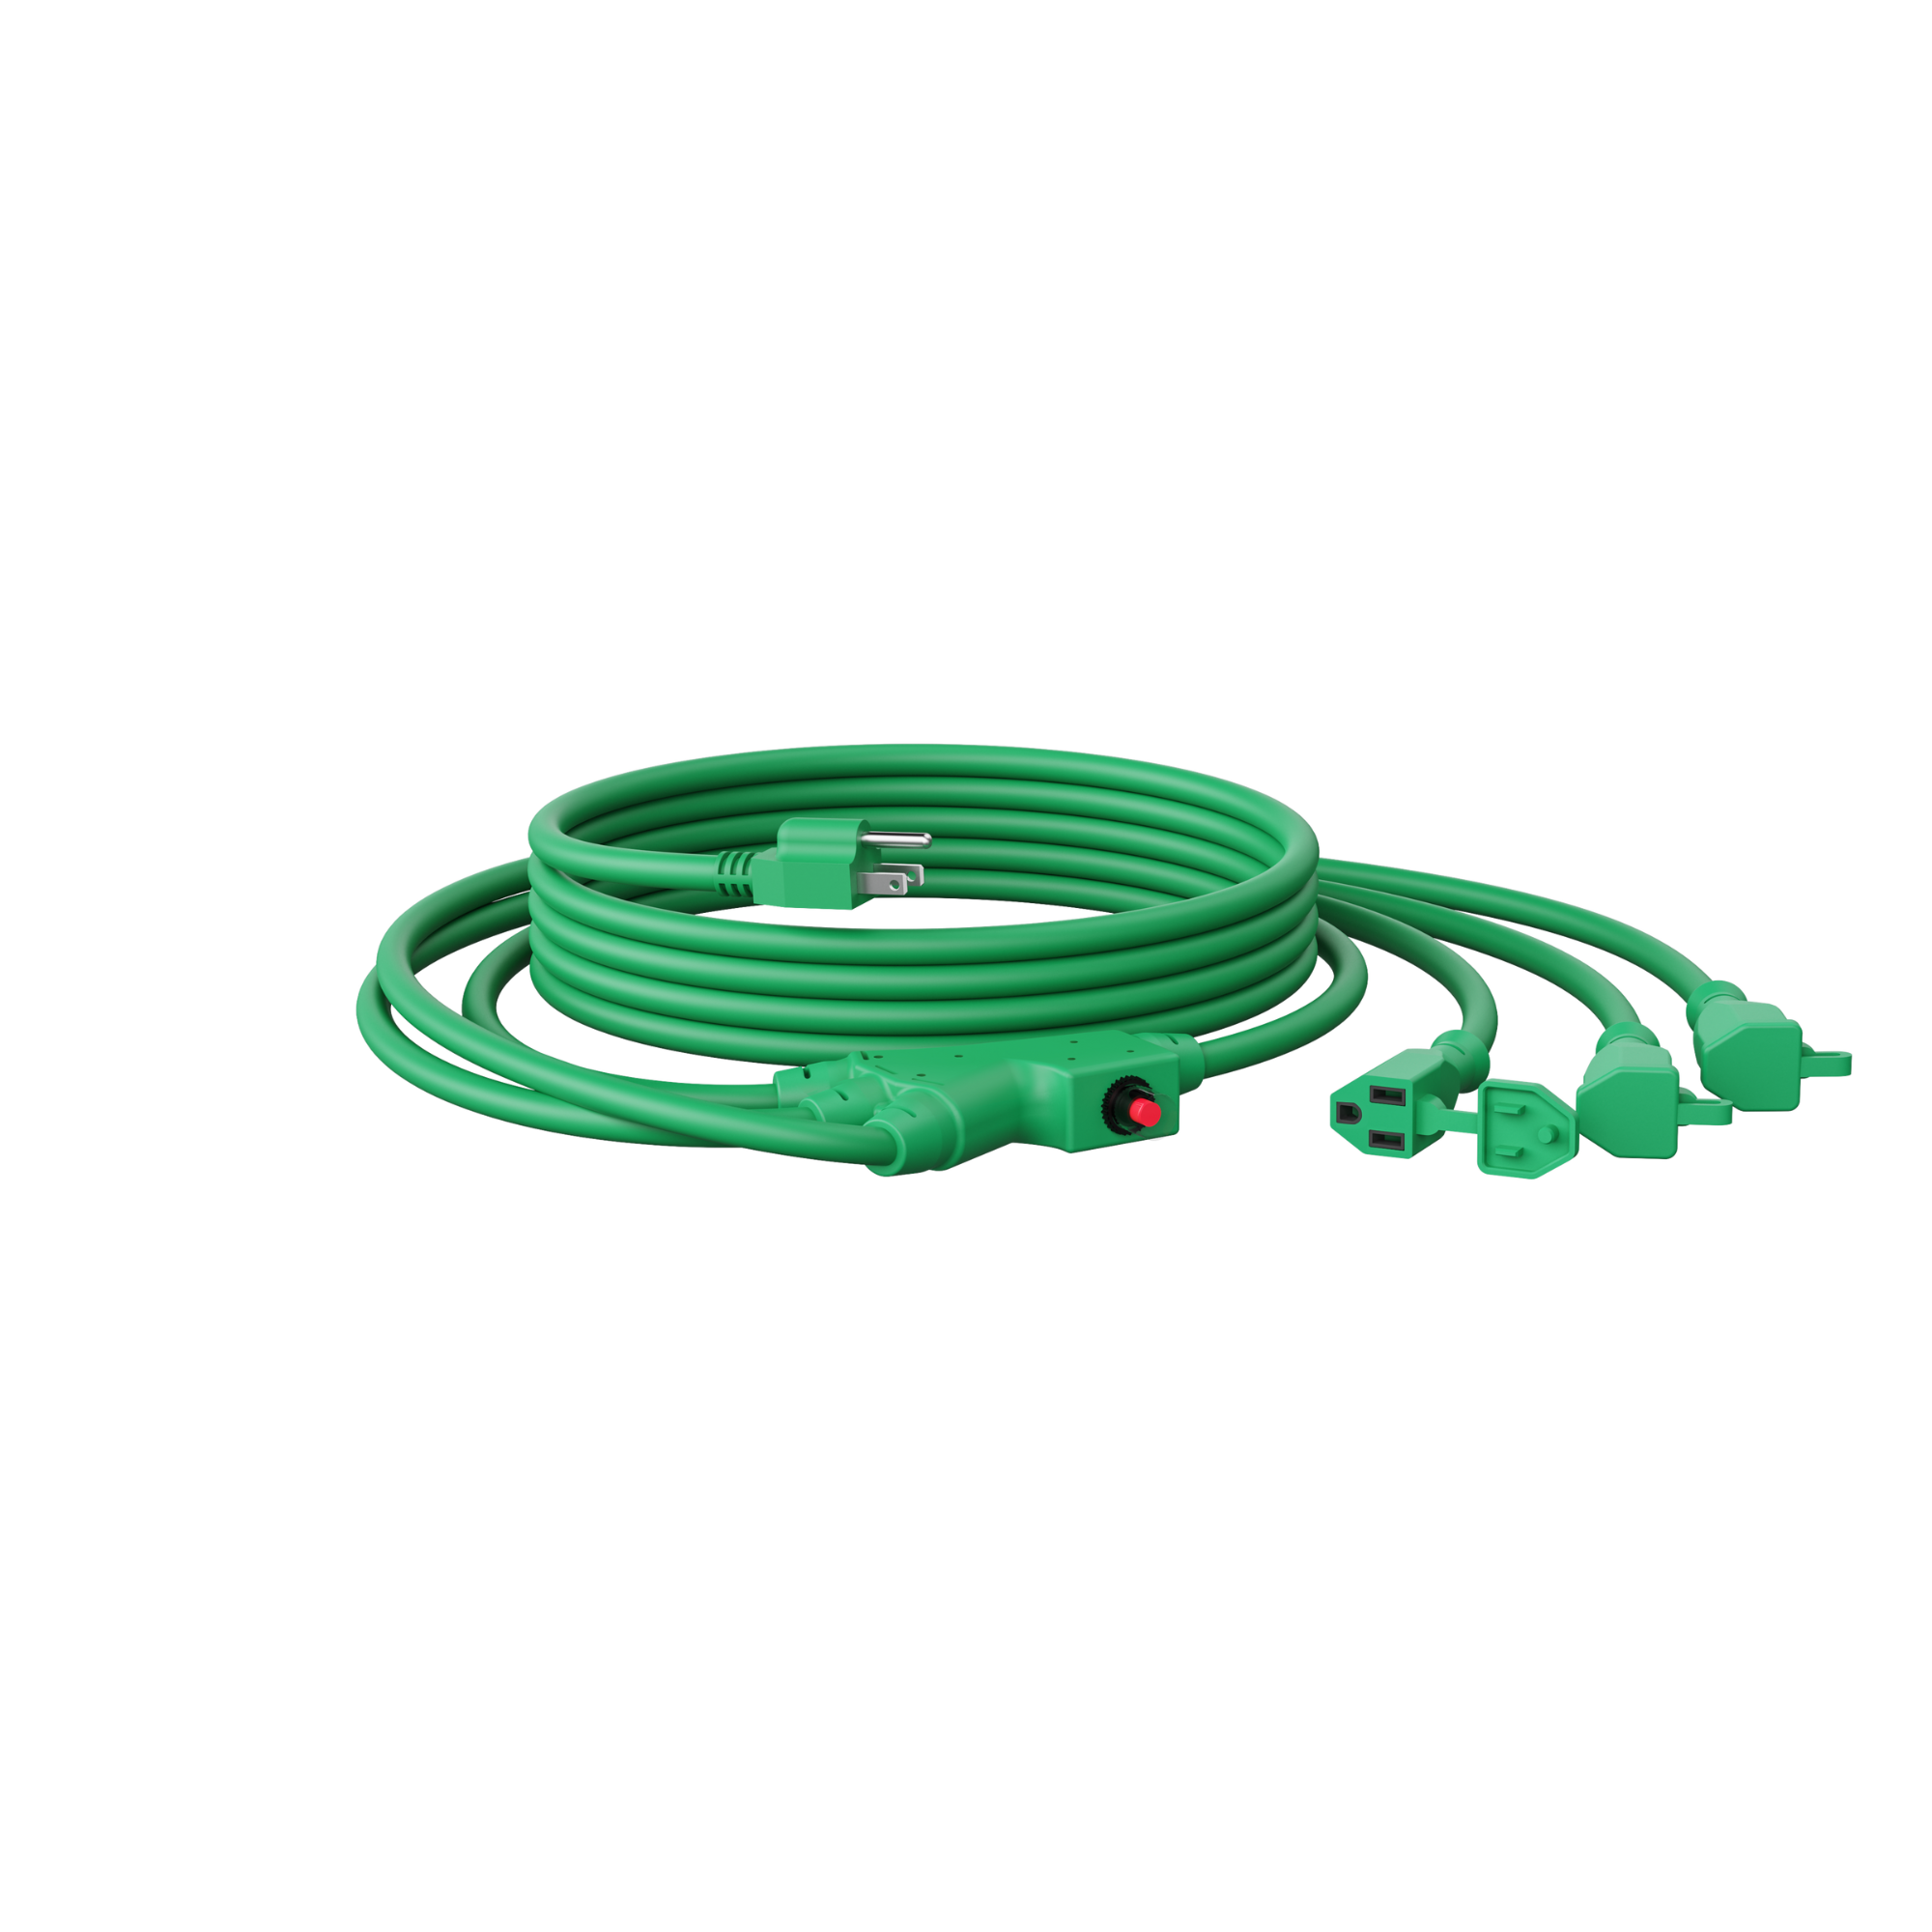 What should you consider when you're buying a retractable extension cord?